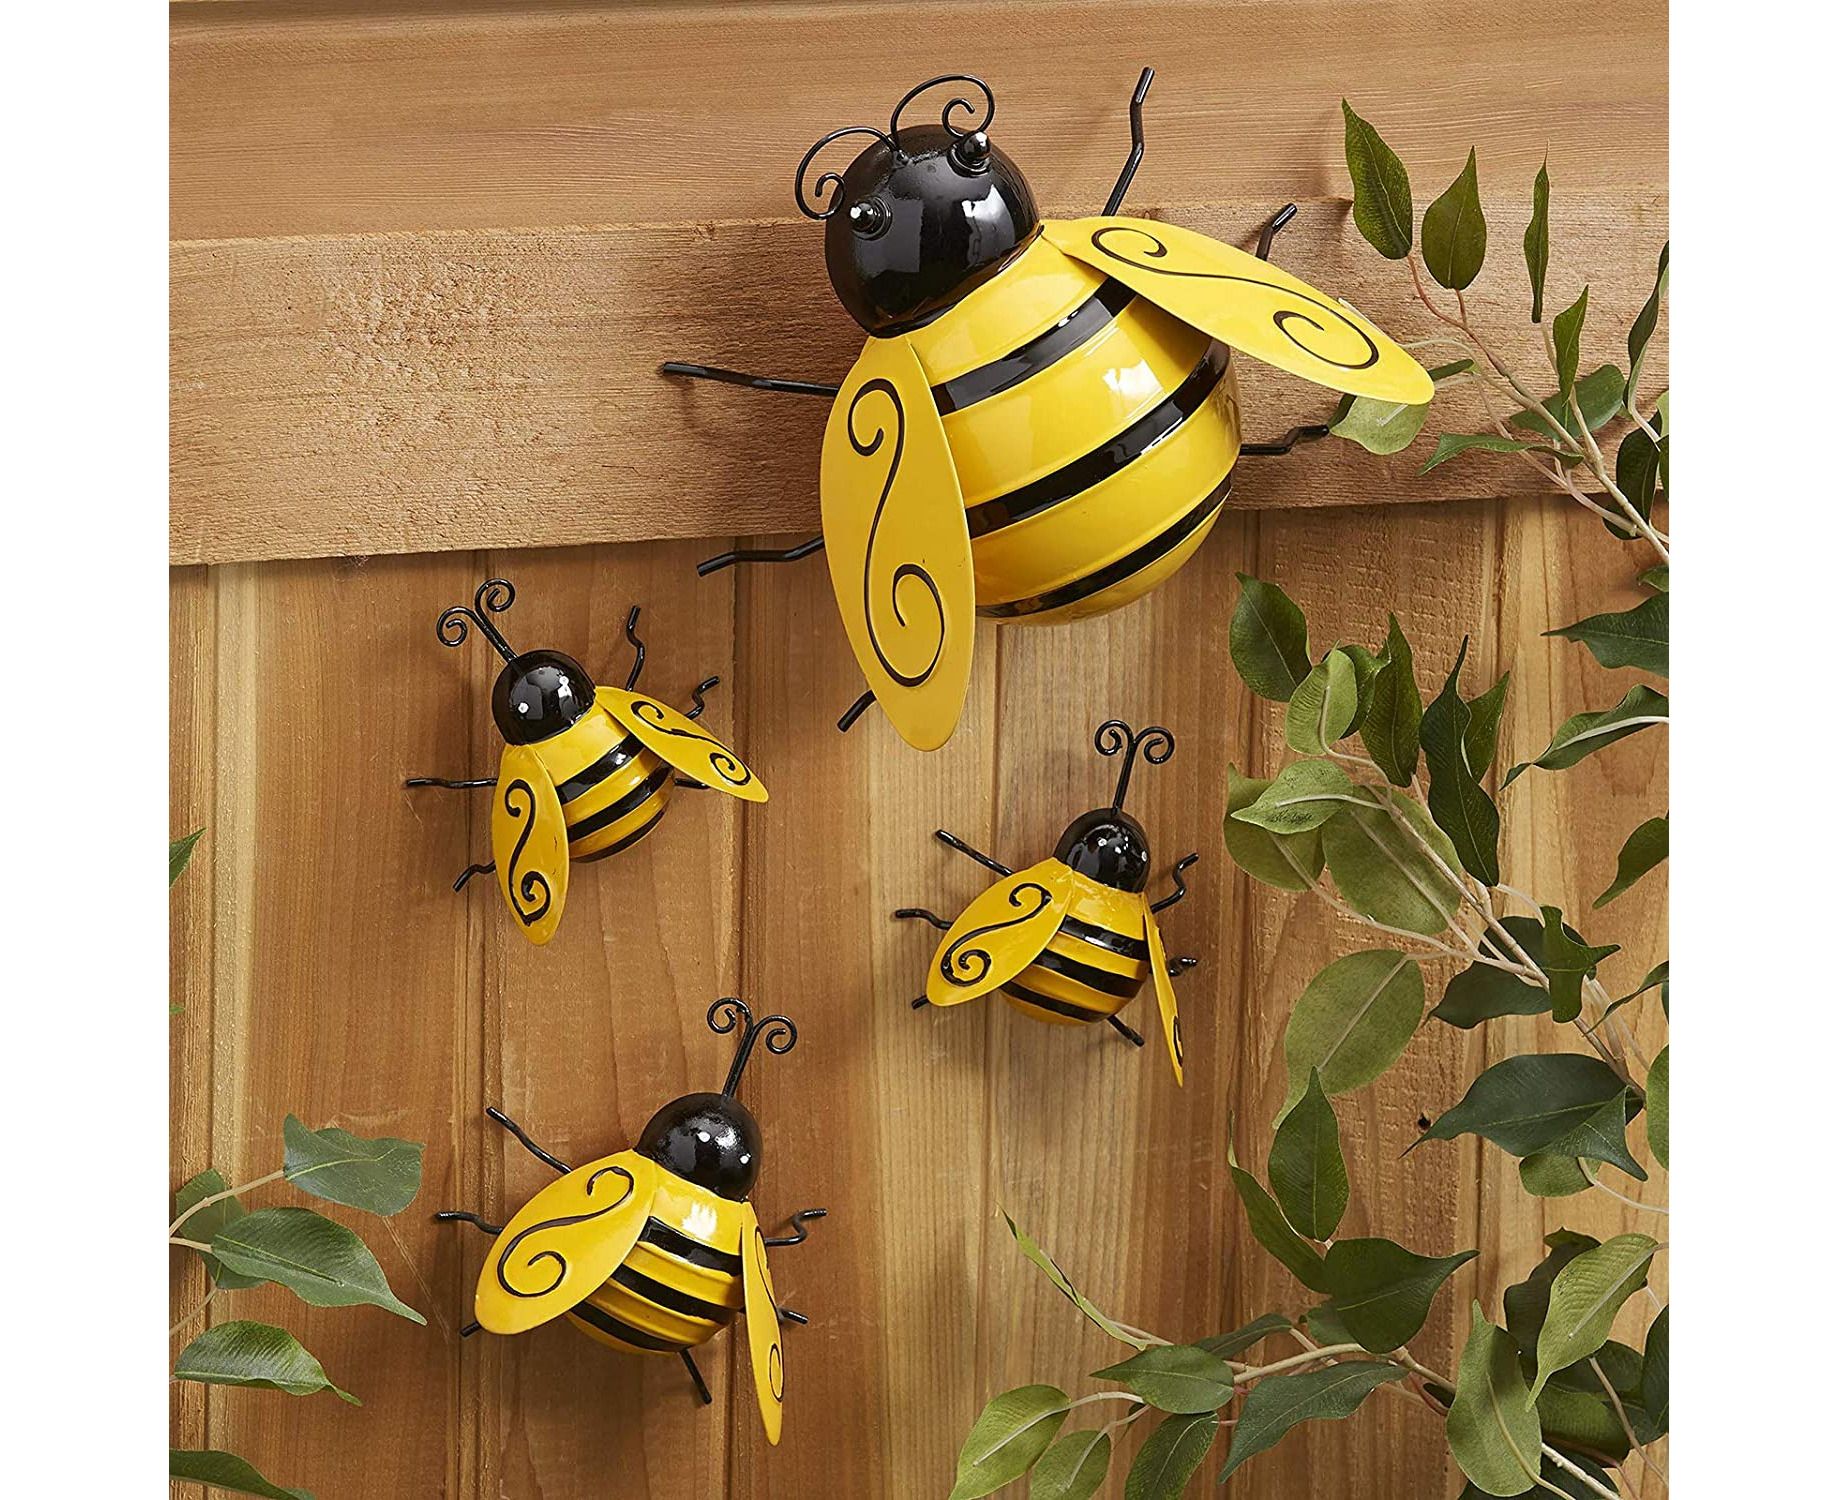 Metal Bee Decor Bumble Bee Garden Accents 3d Honey Bee Wall Ornament Lawn  Yard Fence Funny Cute Bee Figurines – Set Of 4 | Catch.au Inside 2017 Bee Ornament Wall Art (Gallery 7 of 20)